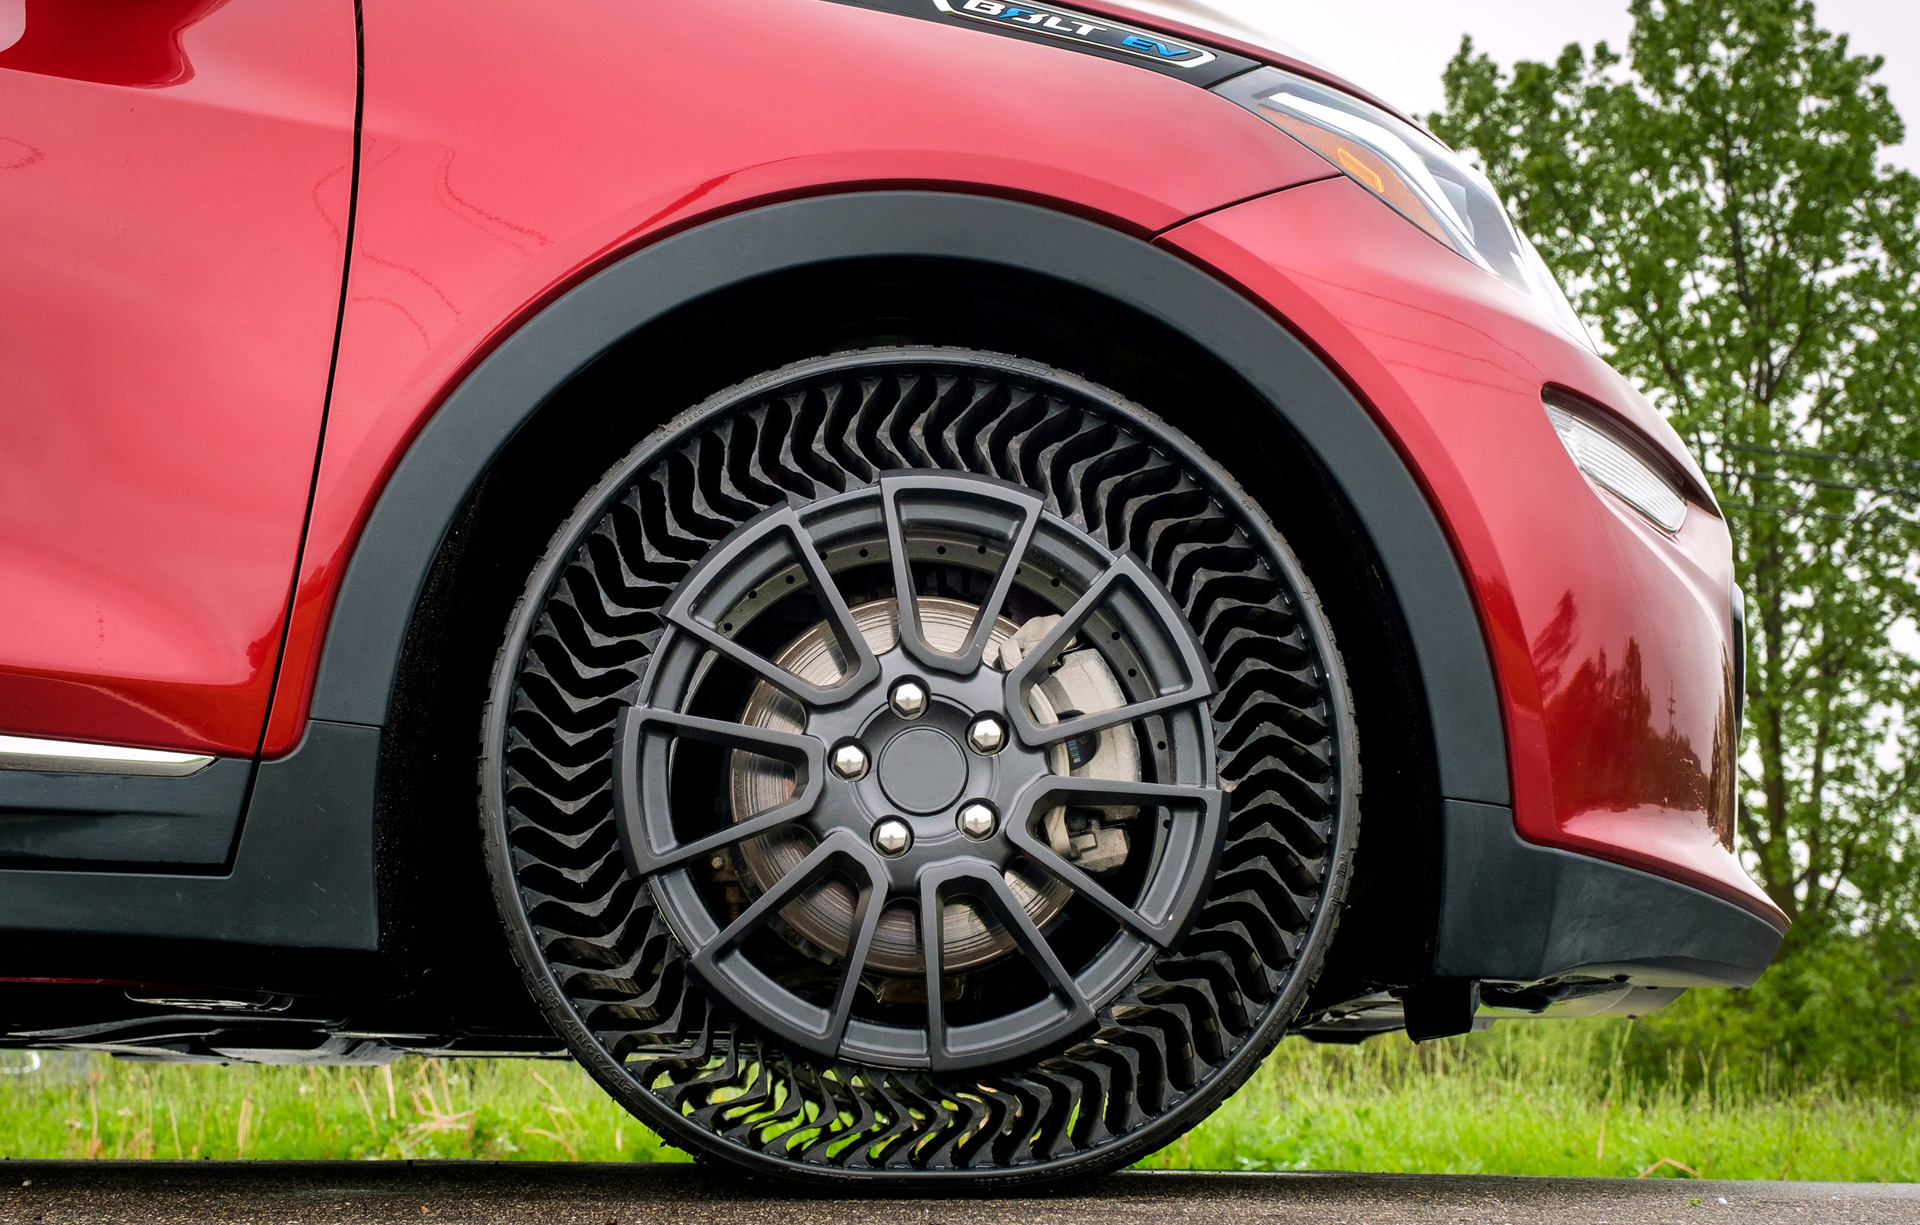 chevrolet-bolt-ev-fitted-with-prototype-airless-tires-from-michelin_100702941_h.jpg